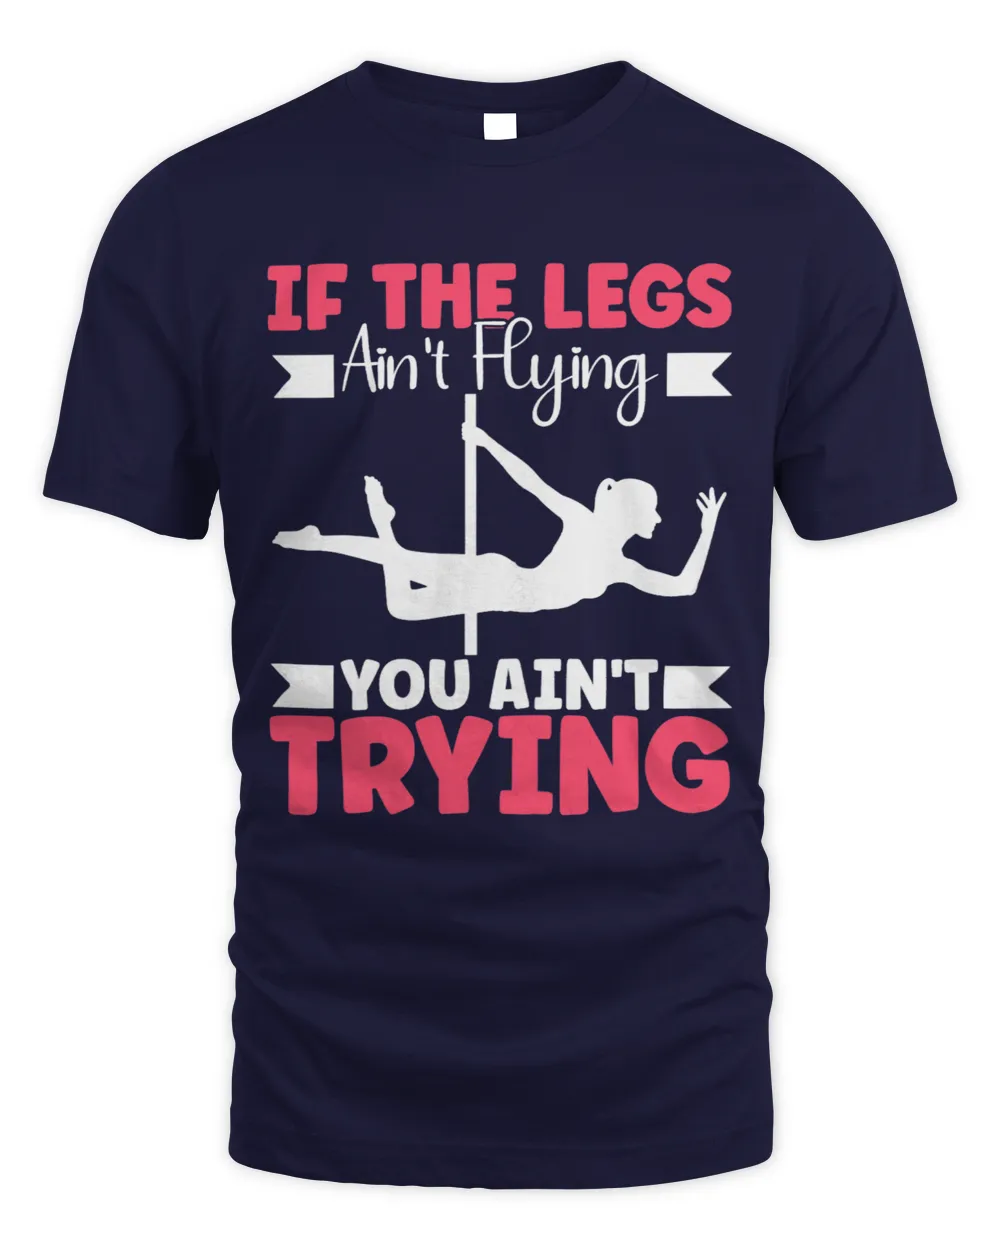 Womens Pole Dancing If The Legs Are Not Flying Pole Dance